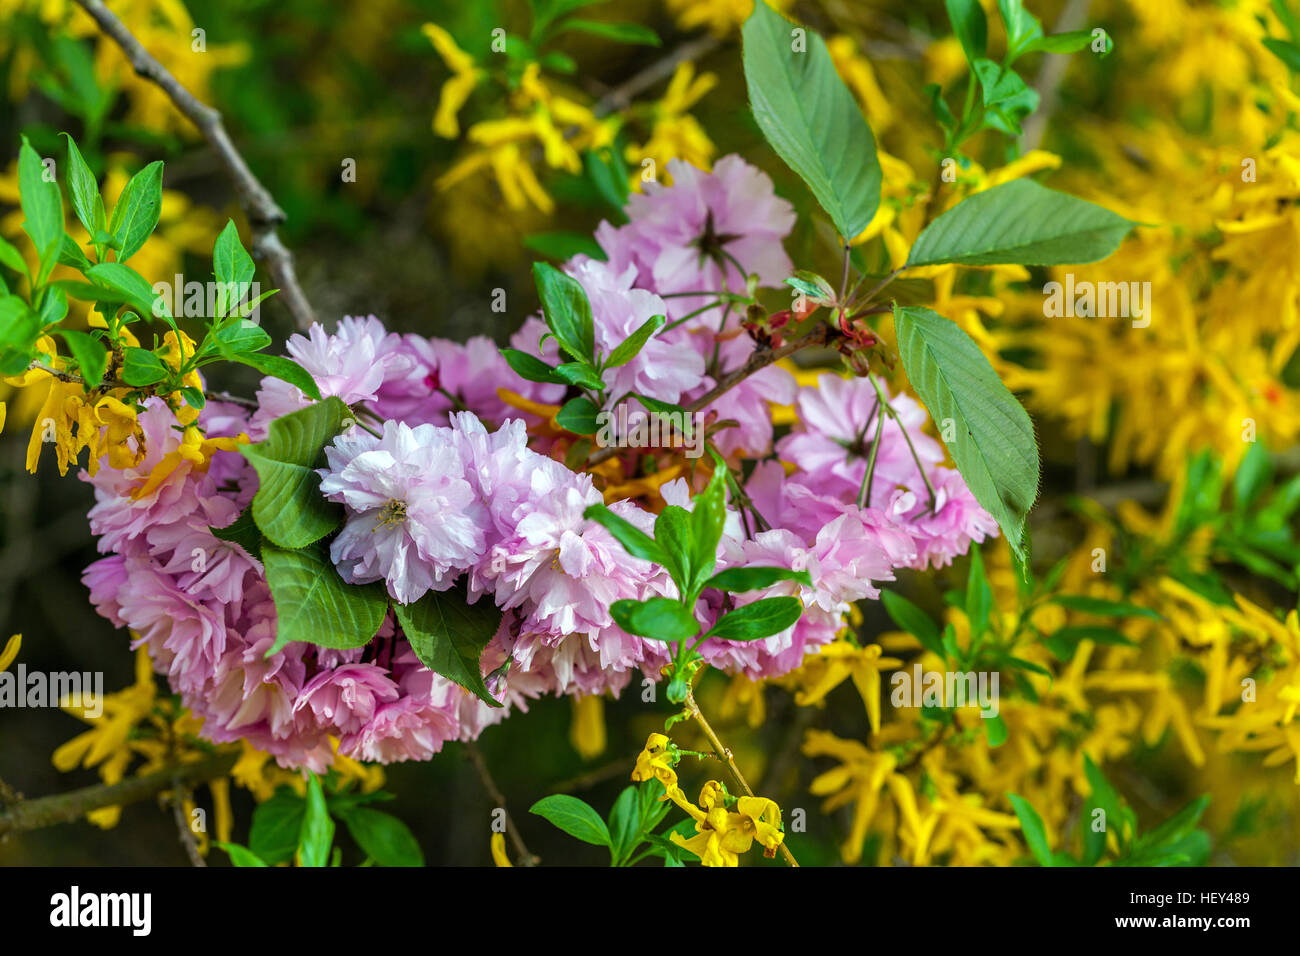 Pink flowering cherry tree twig and background of yellow forsythia blooming, budding leaves Stock Photo